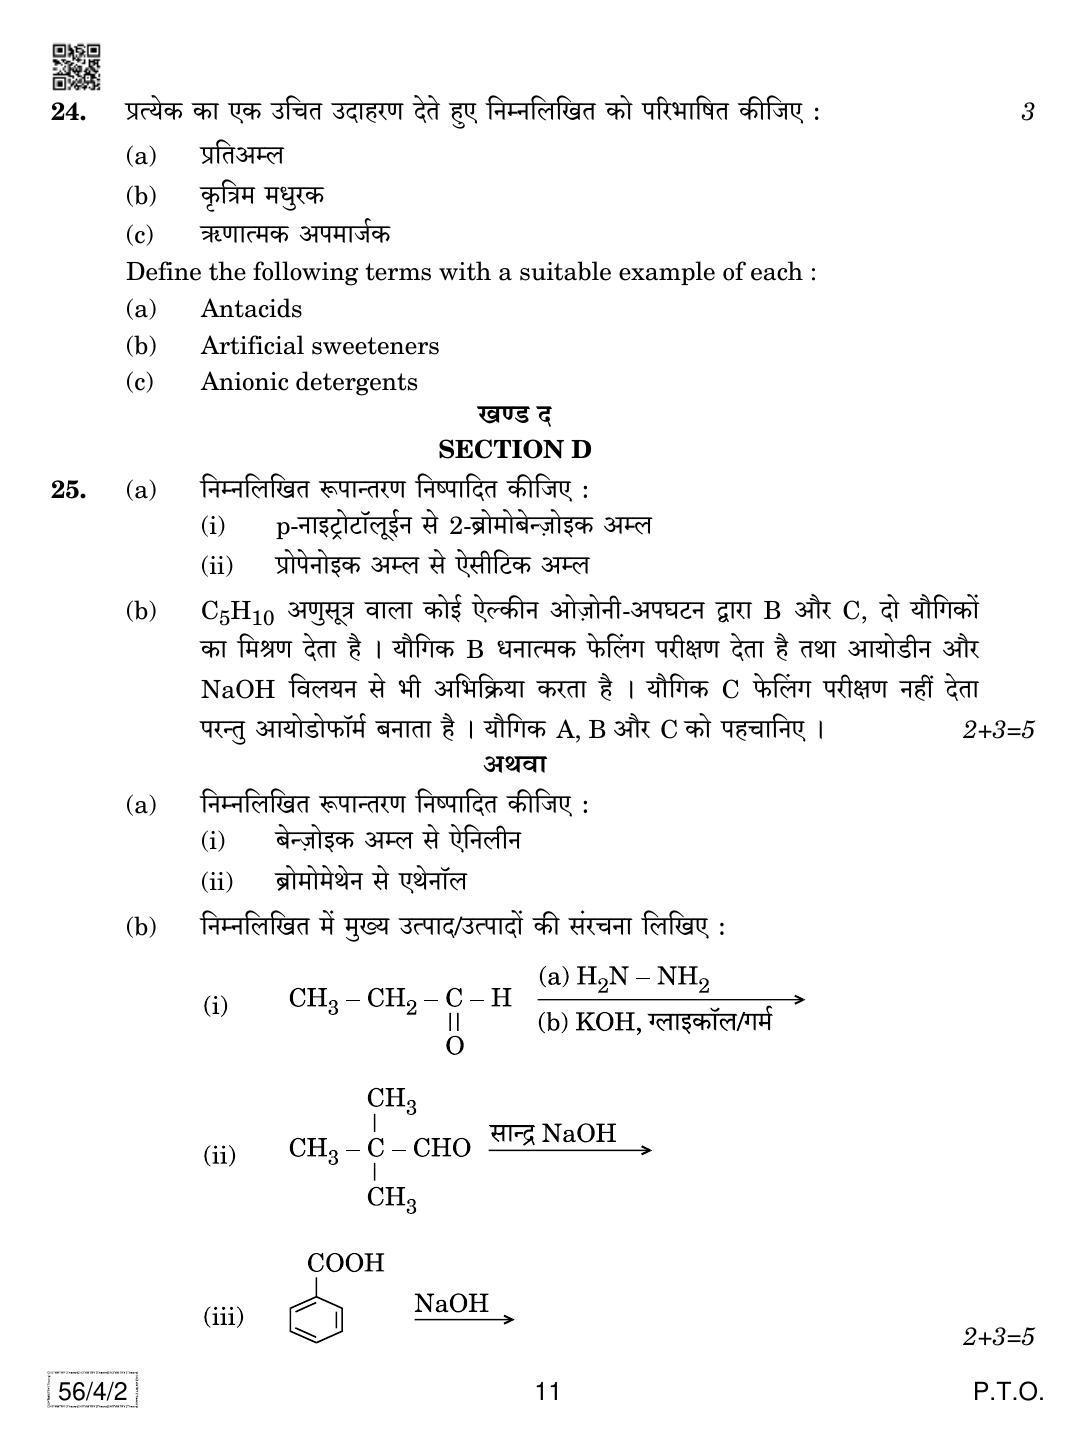 CBSE Class 12 56-4-2 Chemistry 2019 Question Paper - Page 11